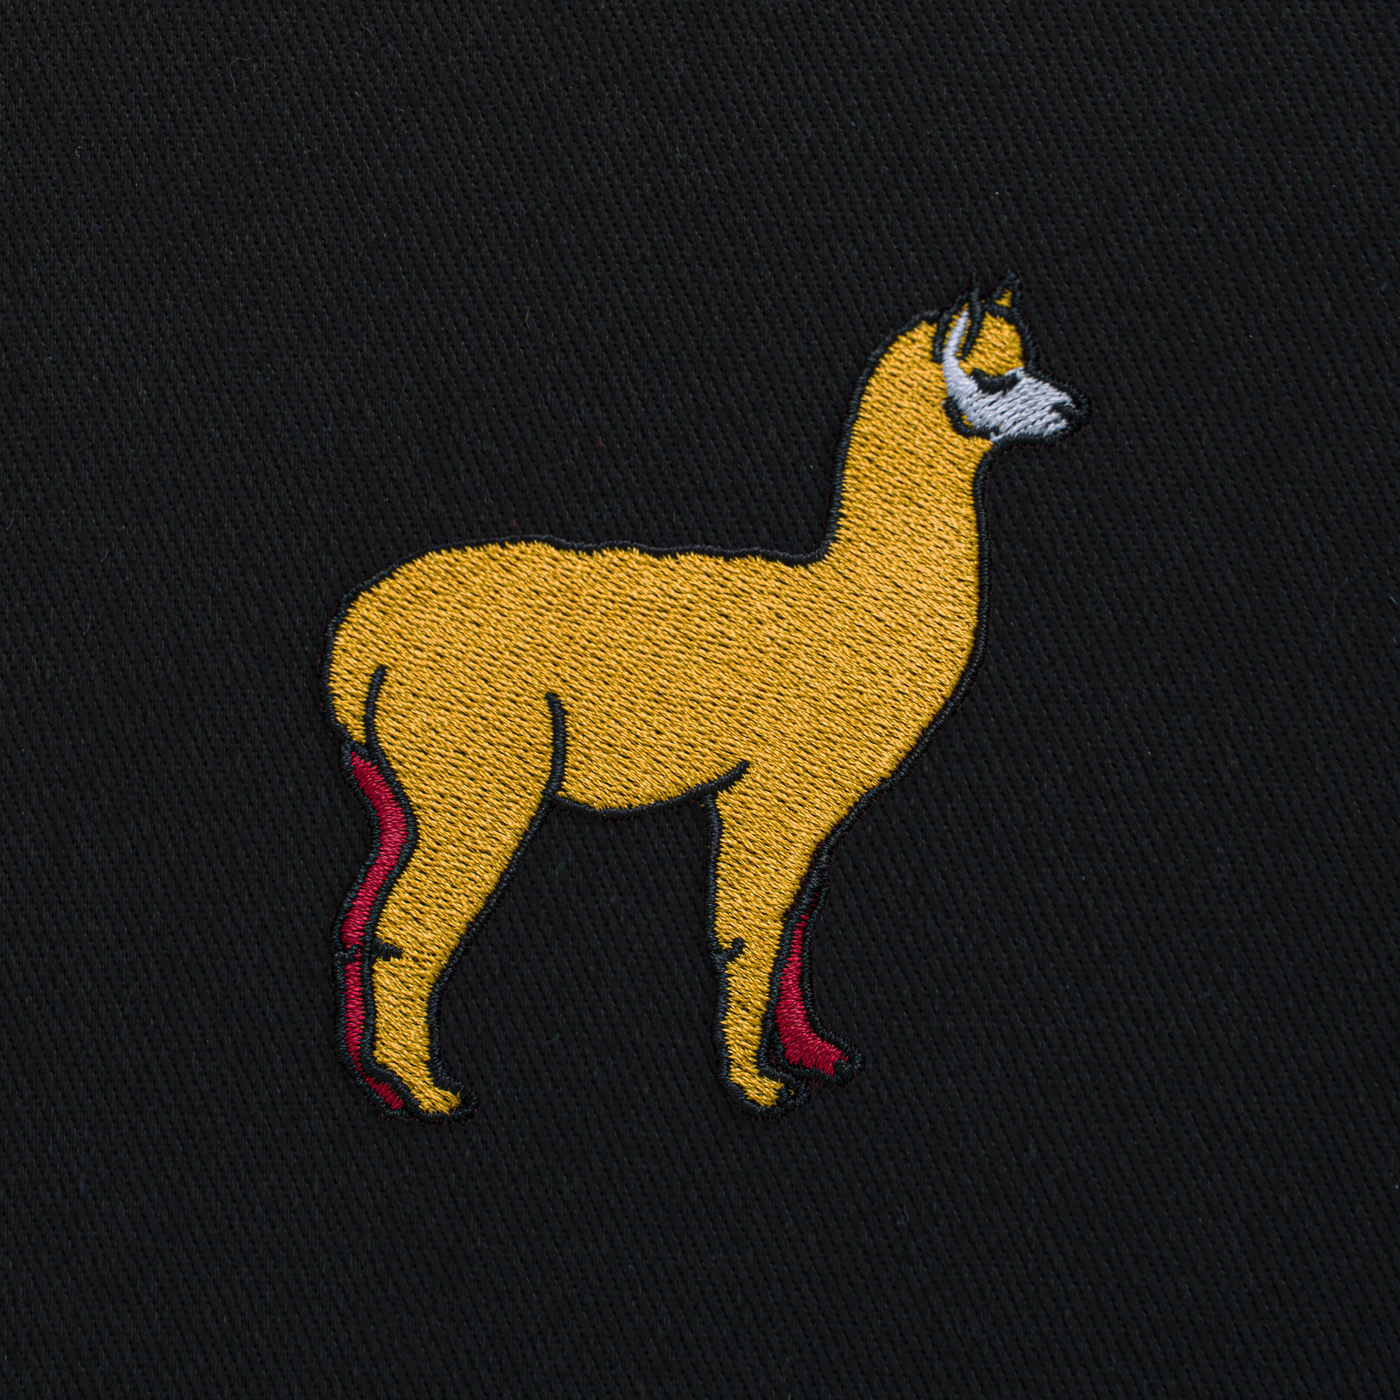 Bobby's Planet Embroidered Alpaca Tote Bag from South American Amazon Animals Collection in Black Color#color_black